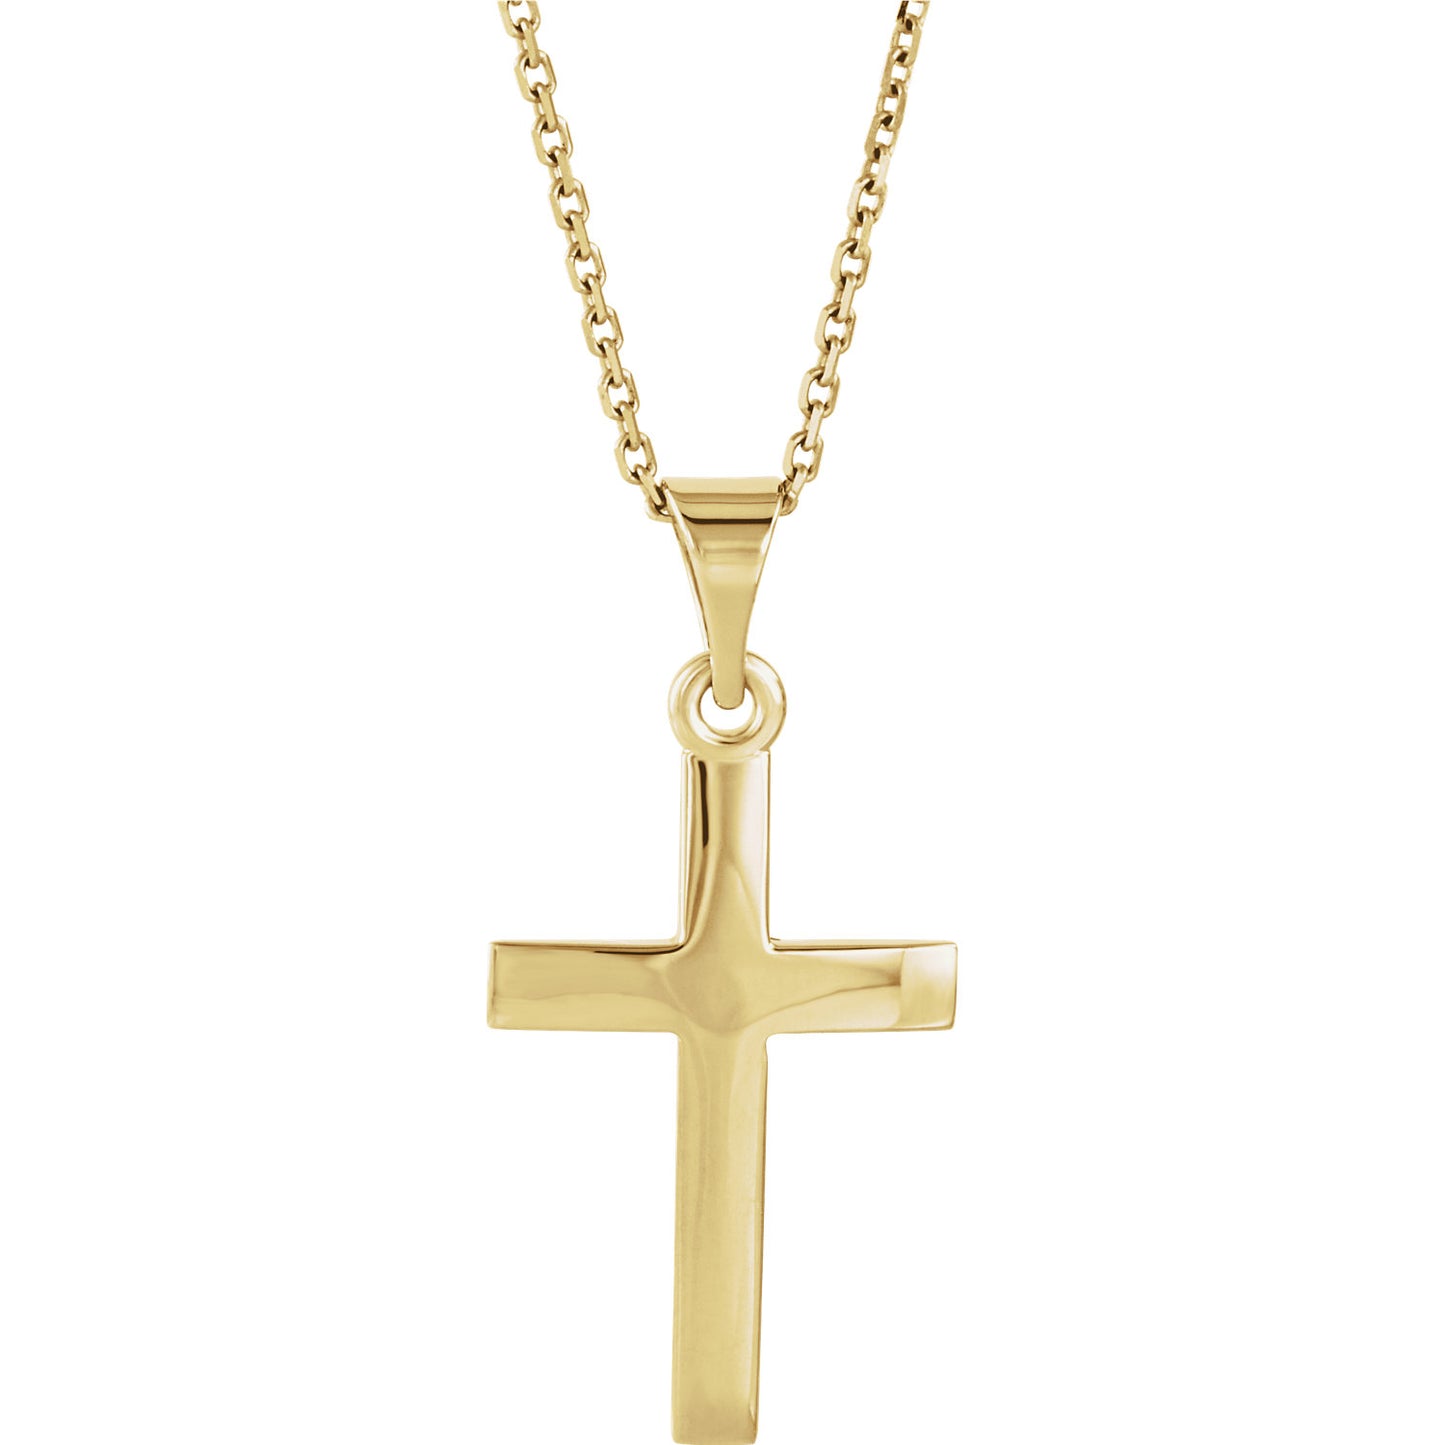 14KT Yellow Gold Cross Chain Necklace 18", 14KT Yellow Gold Cross Chain Necklace 18" - Legacy Saint Jewelry